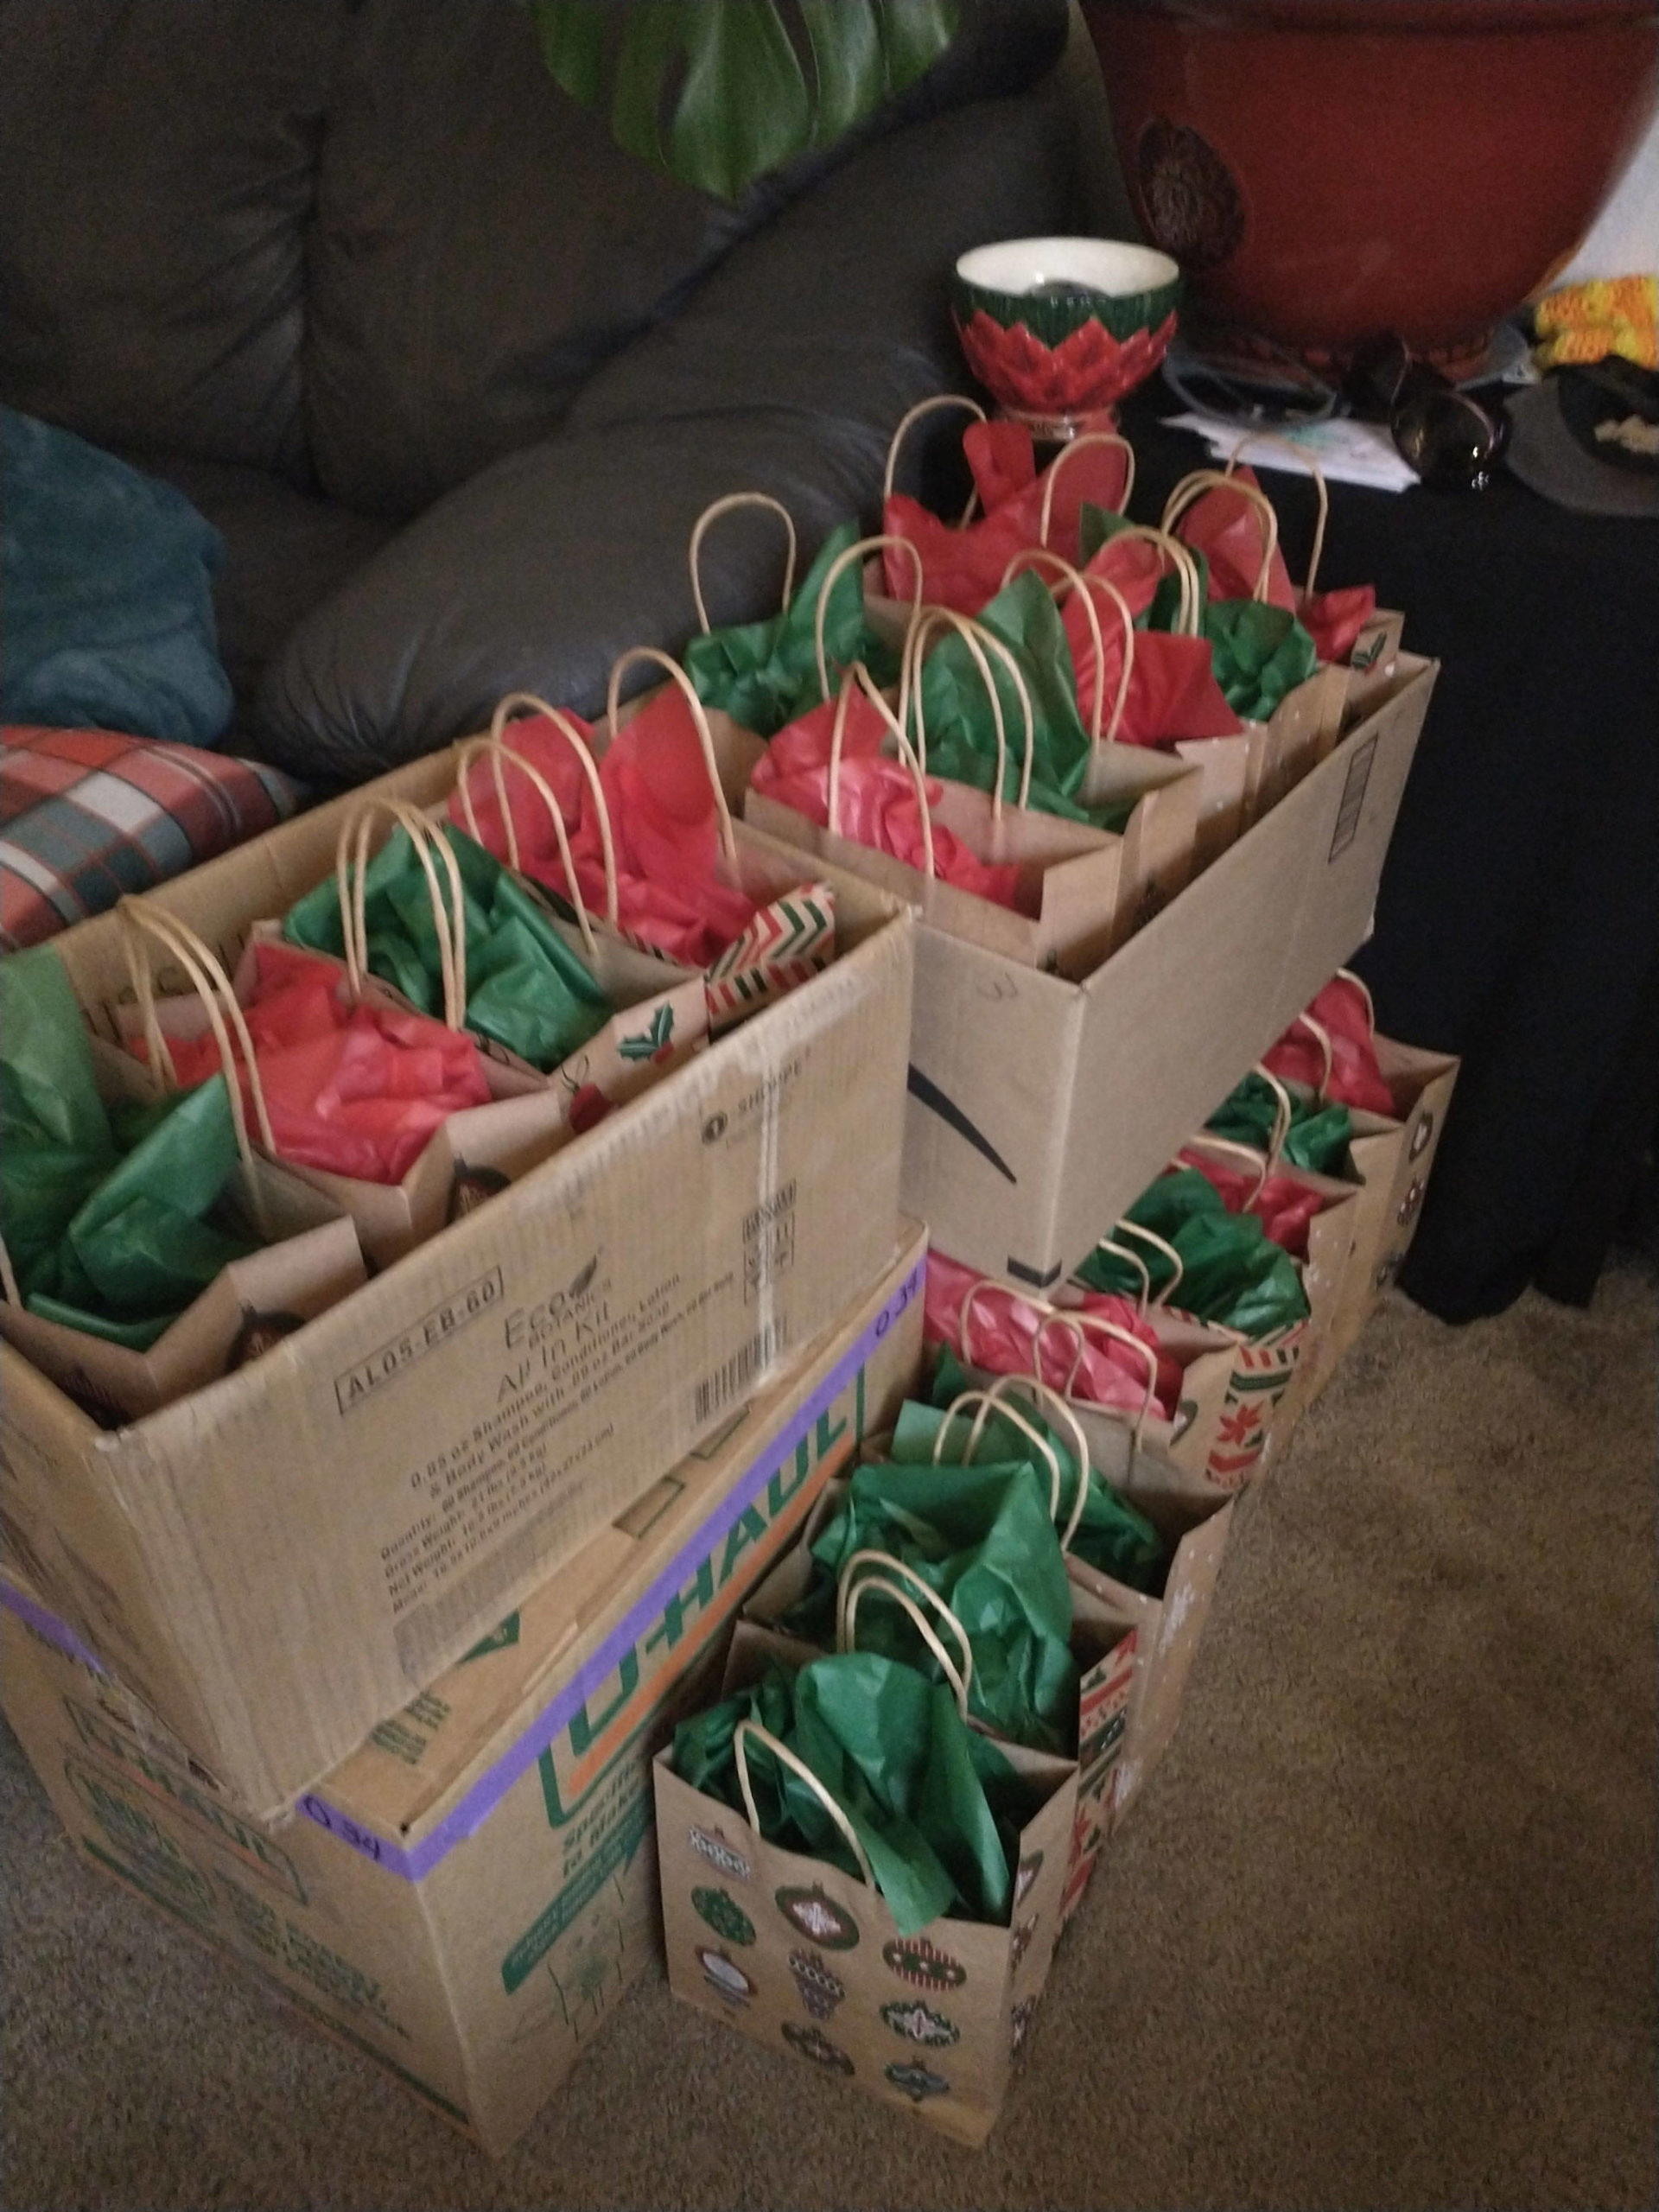 This year, Sequim freshman River Jensen bagged and sent out 575 care packs of toiletries and day-to-day items to local agencies. (Photo courtesy of Anna Larsen)